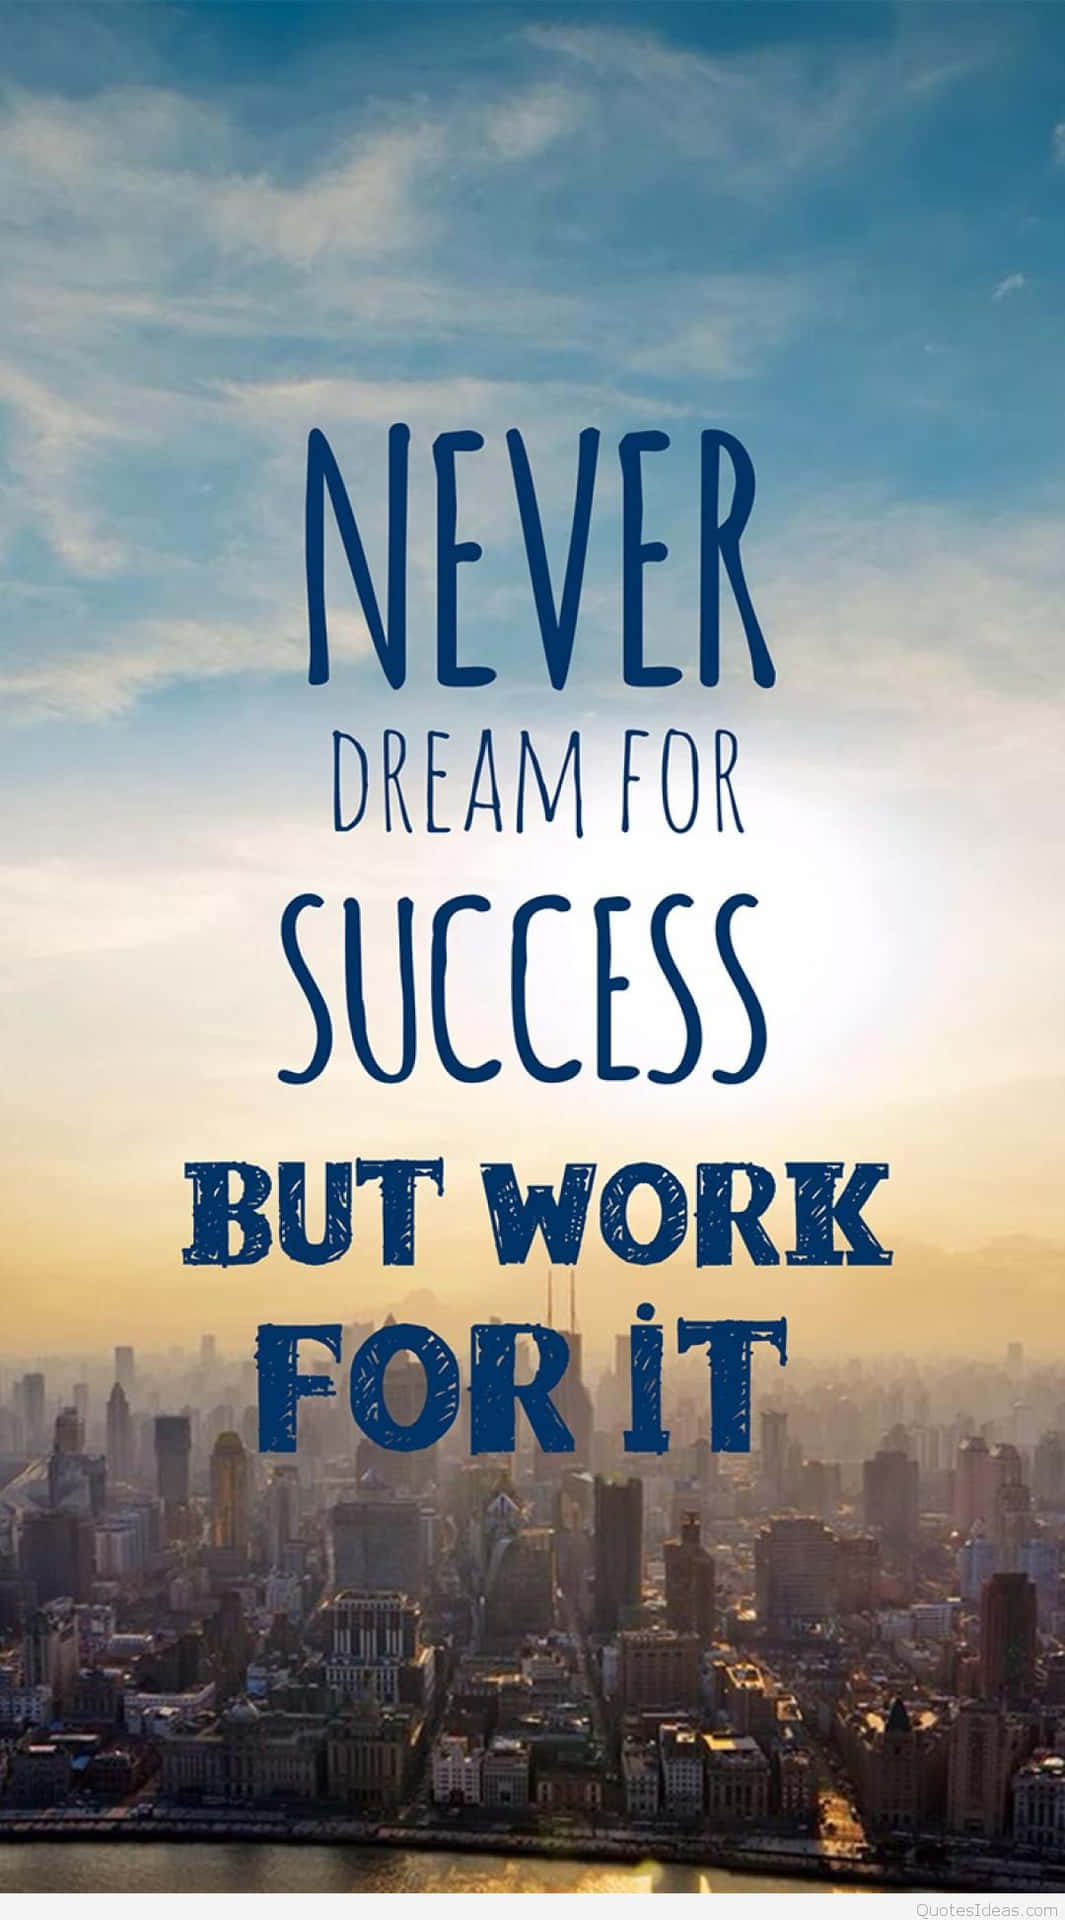 Work For Success_ Quote Over Cityscape.jpg Wallpaper